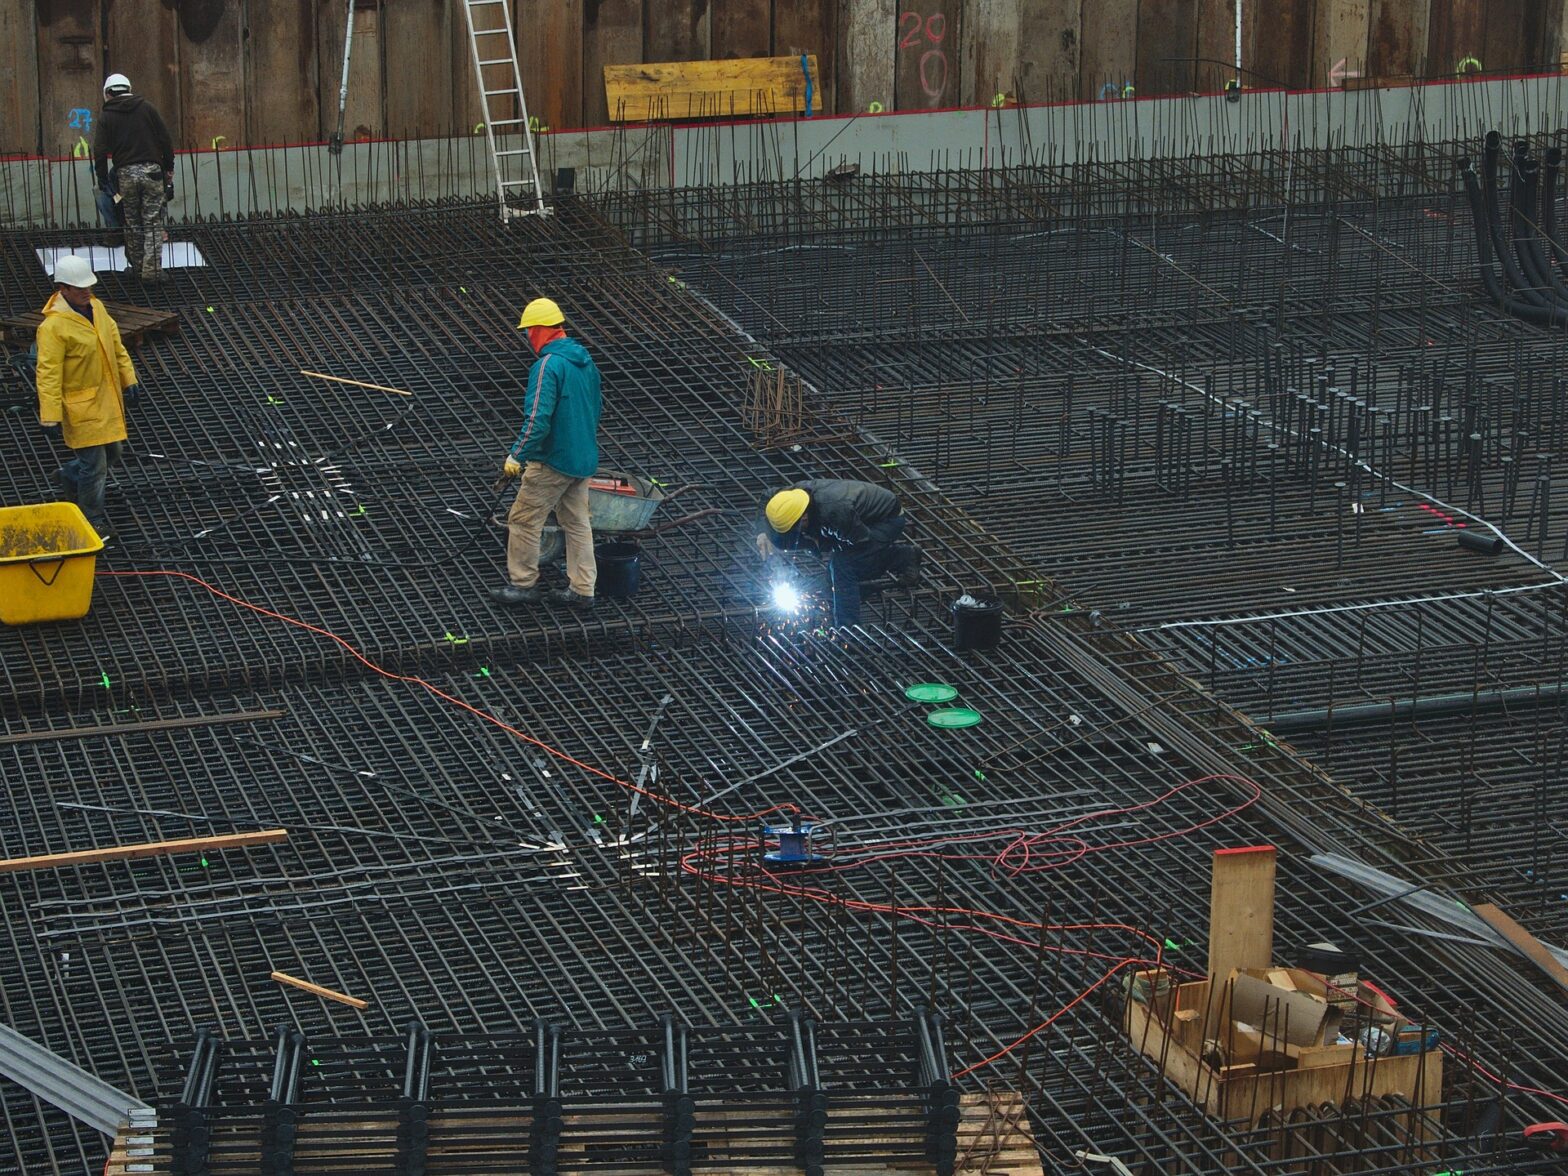 Image of construction workers on a site welding